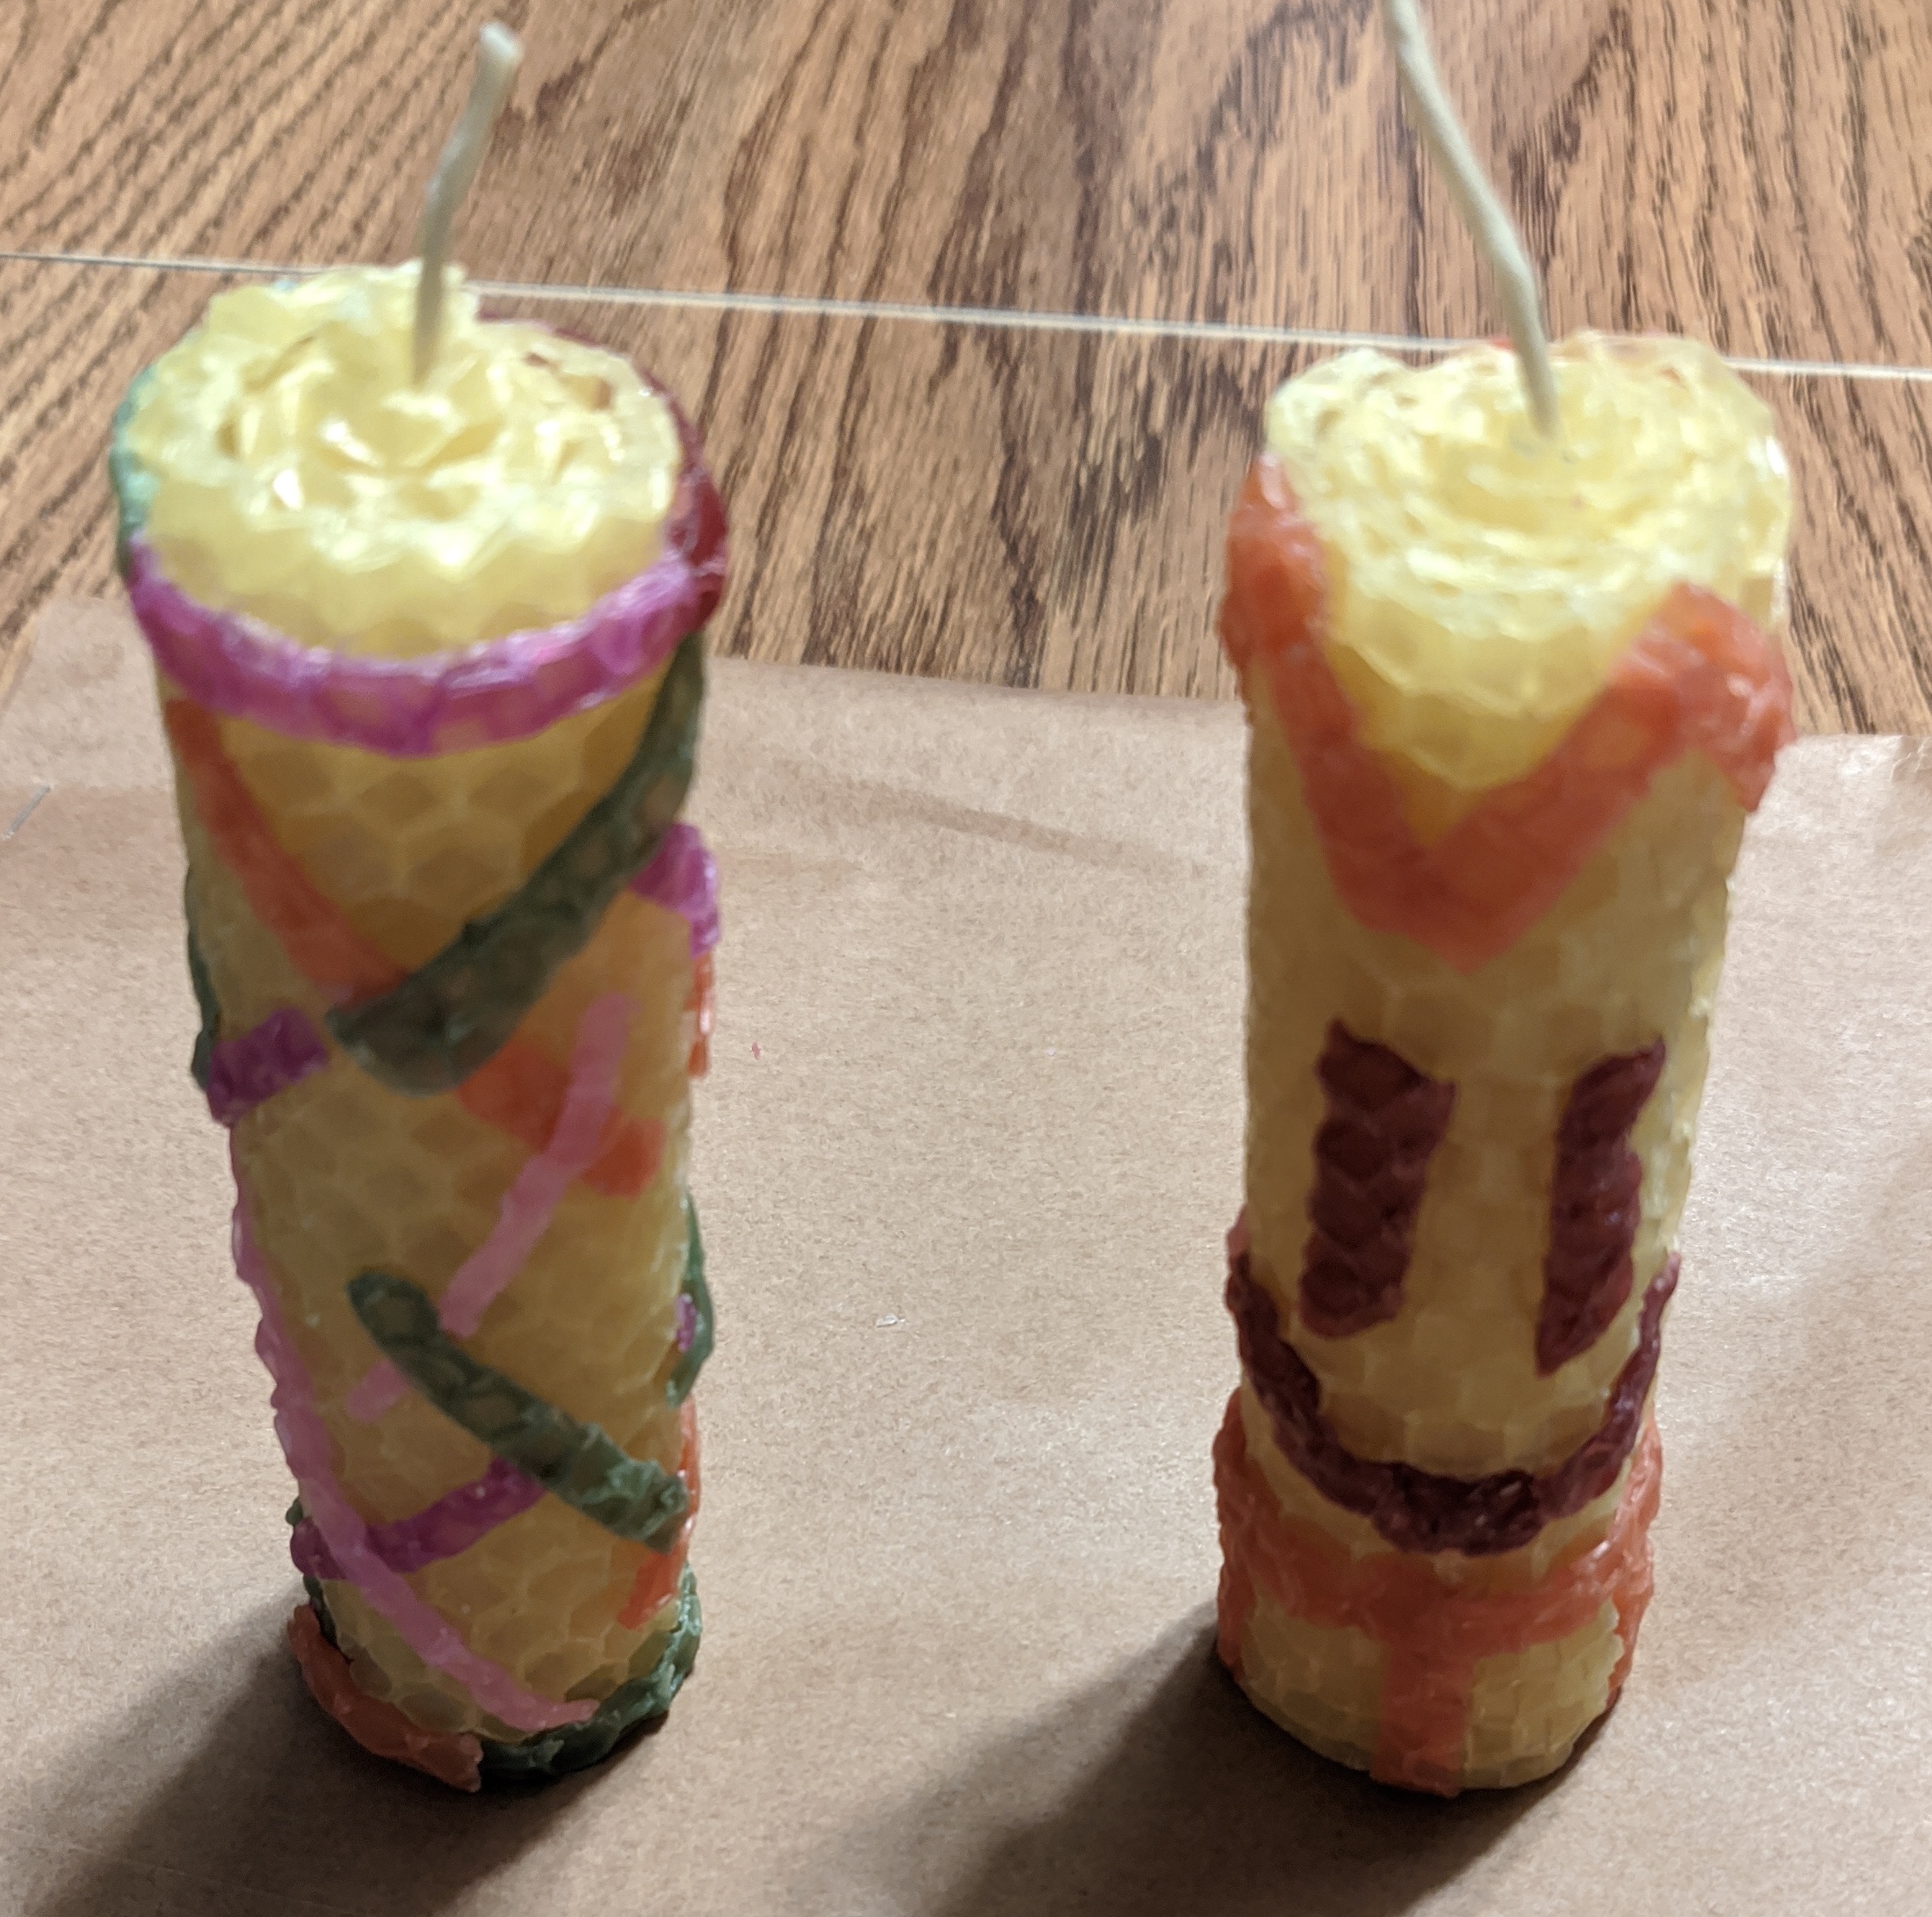 Our pair of beeswax candles